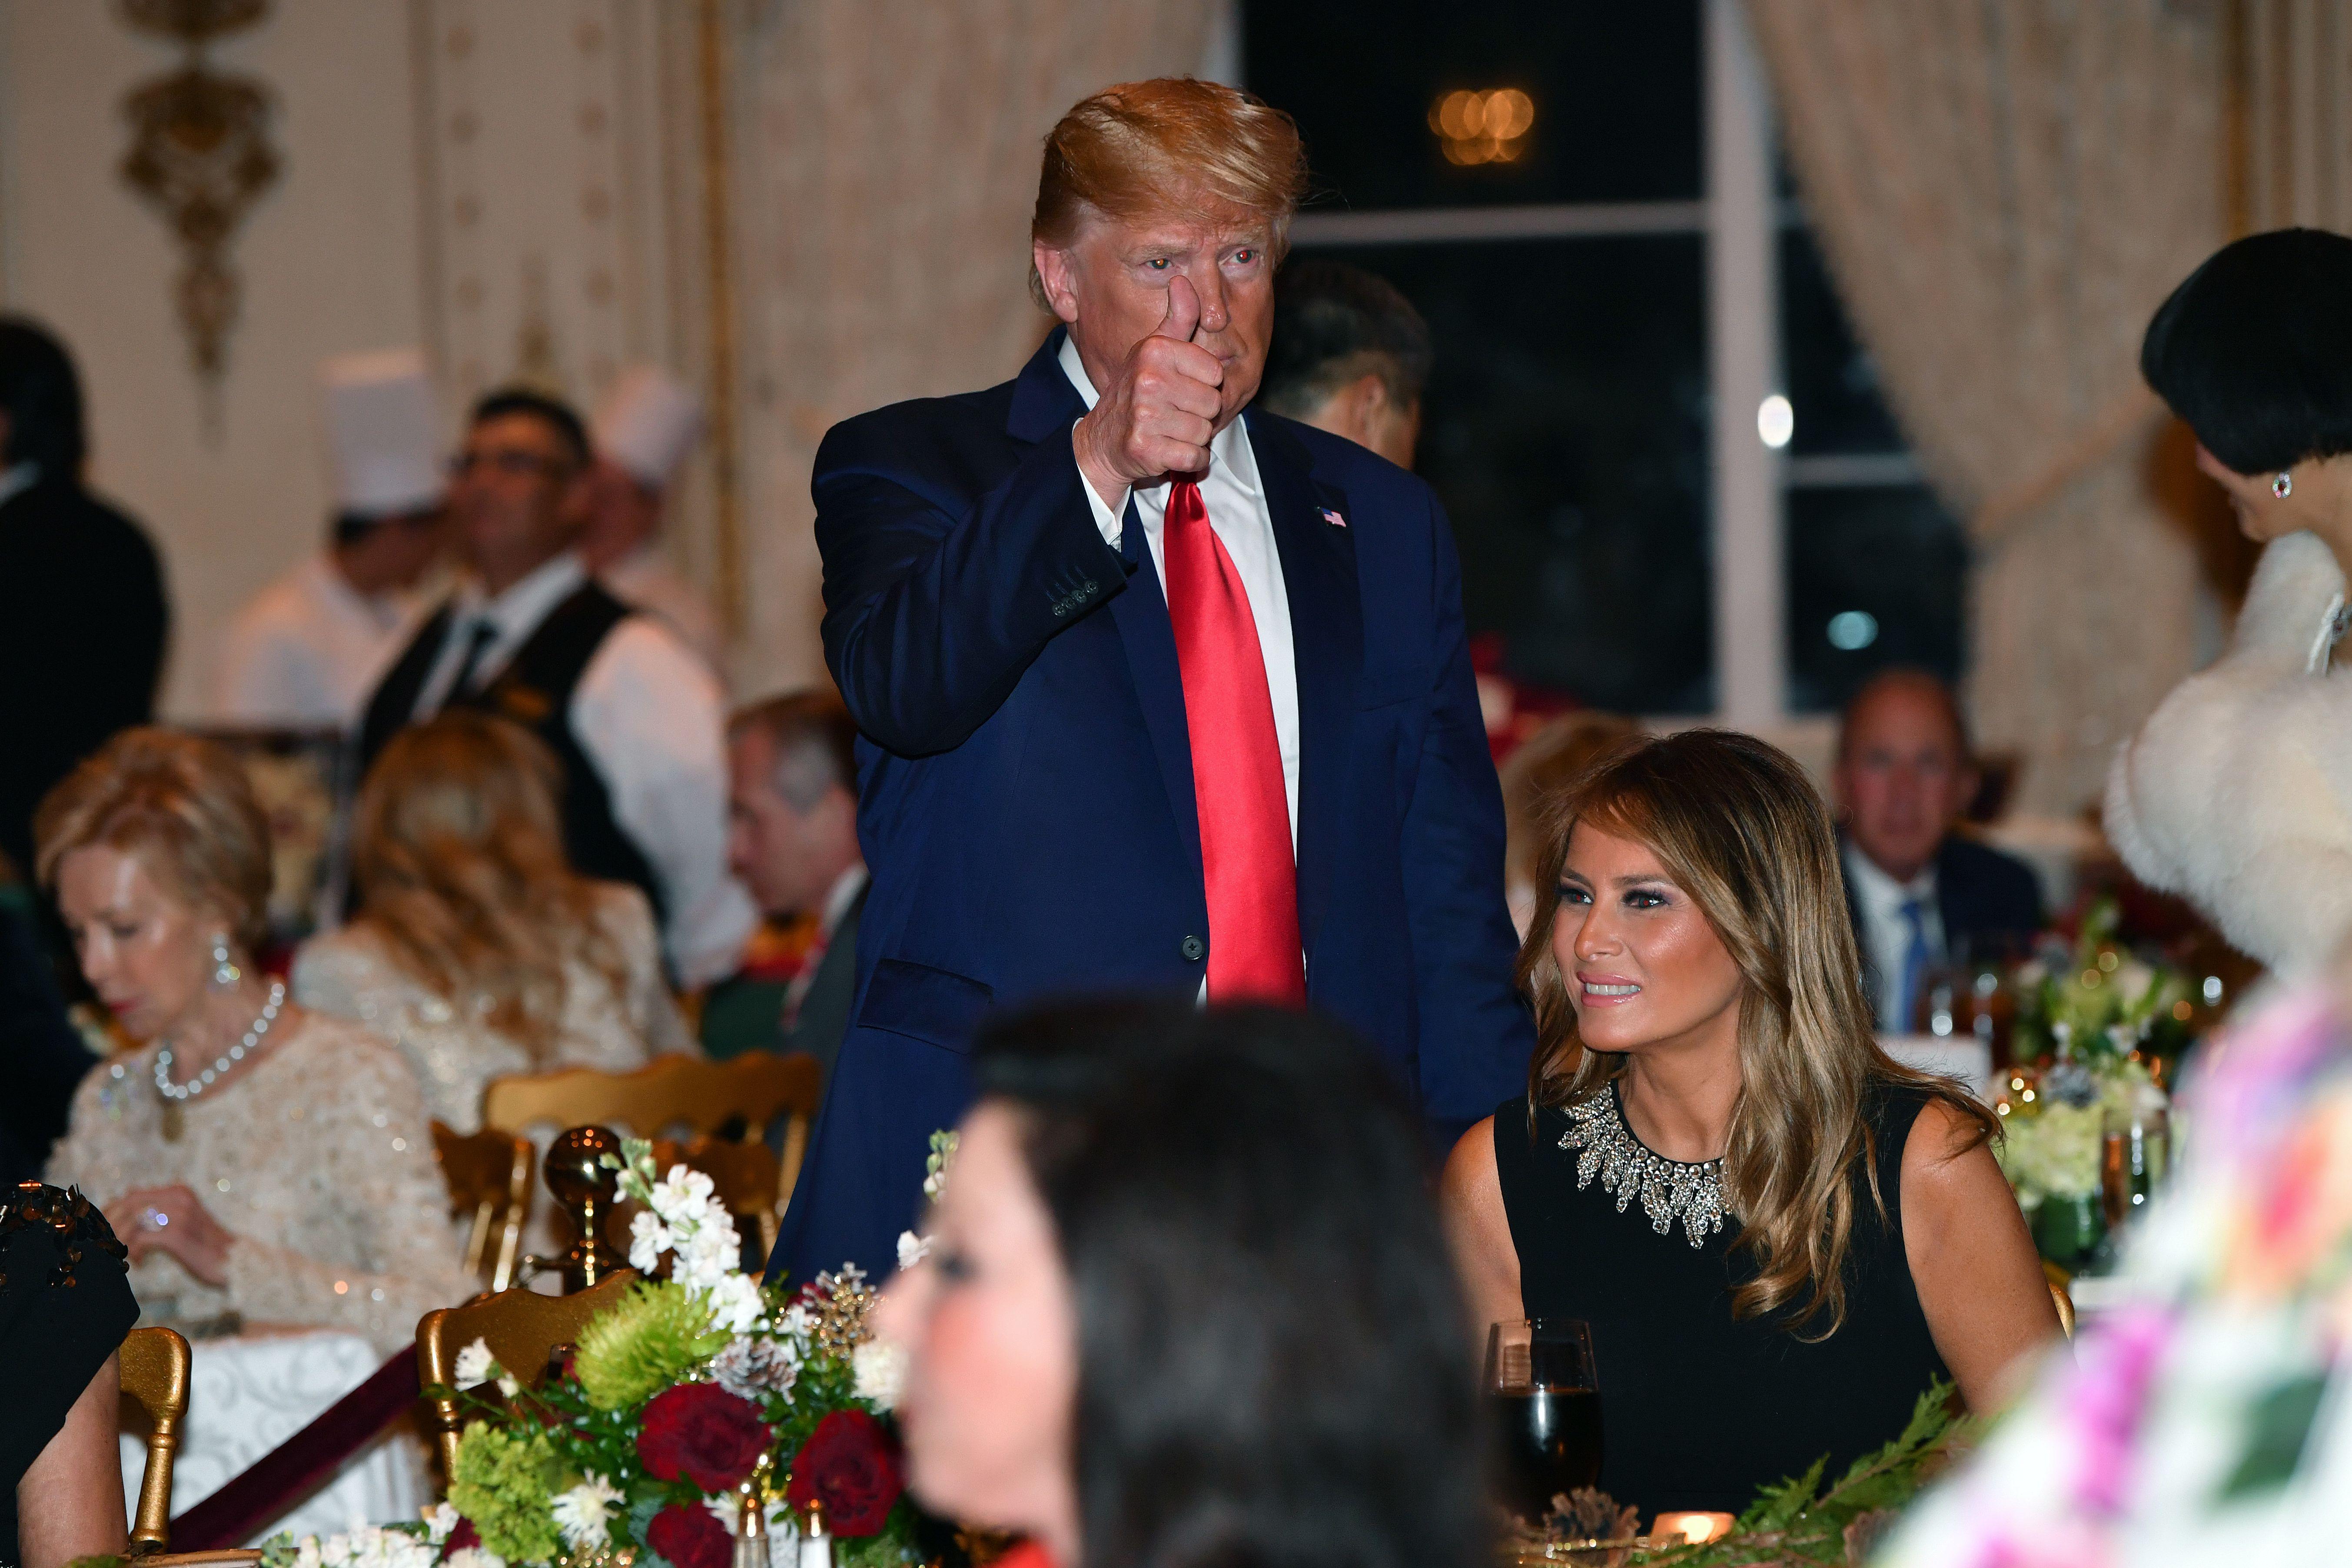 Trump, standing, makes a thumbs-up. Melania is seated next to him in a fancy banquet hall full of other guests.